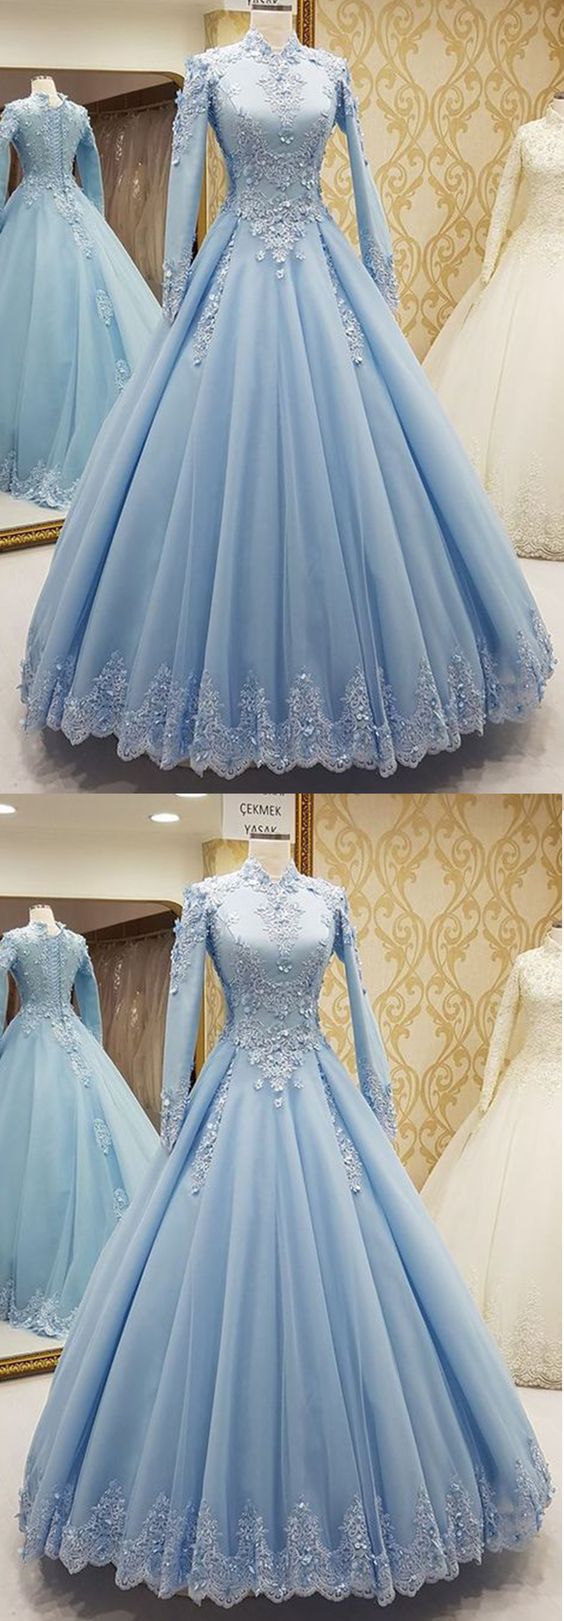 Blue Tulle High Neck Customize Formal Evening Dress With Long Sleeves M6275